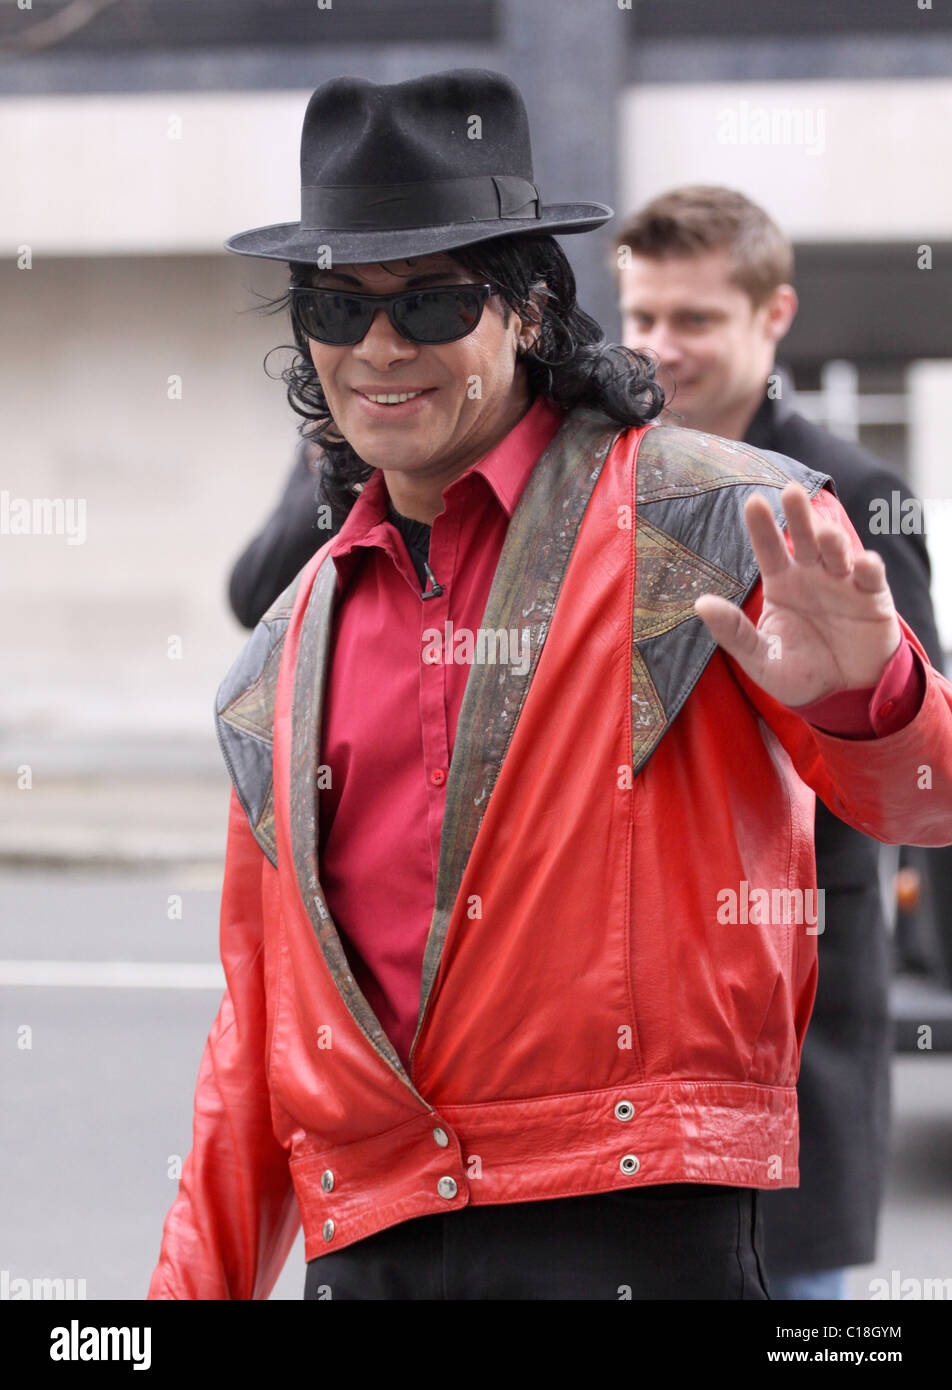 A handful of Michael Jackson fans show up outside the star's hotel. London,  England - 04.03.09 Stock Photo - Alamy